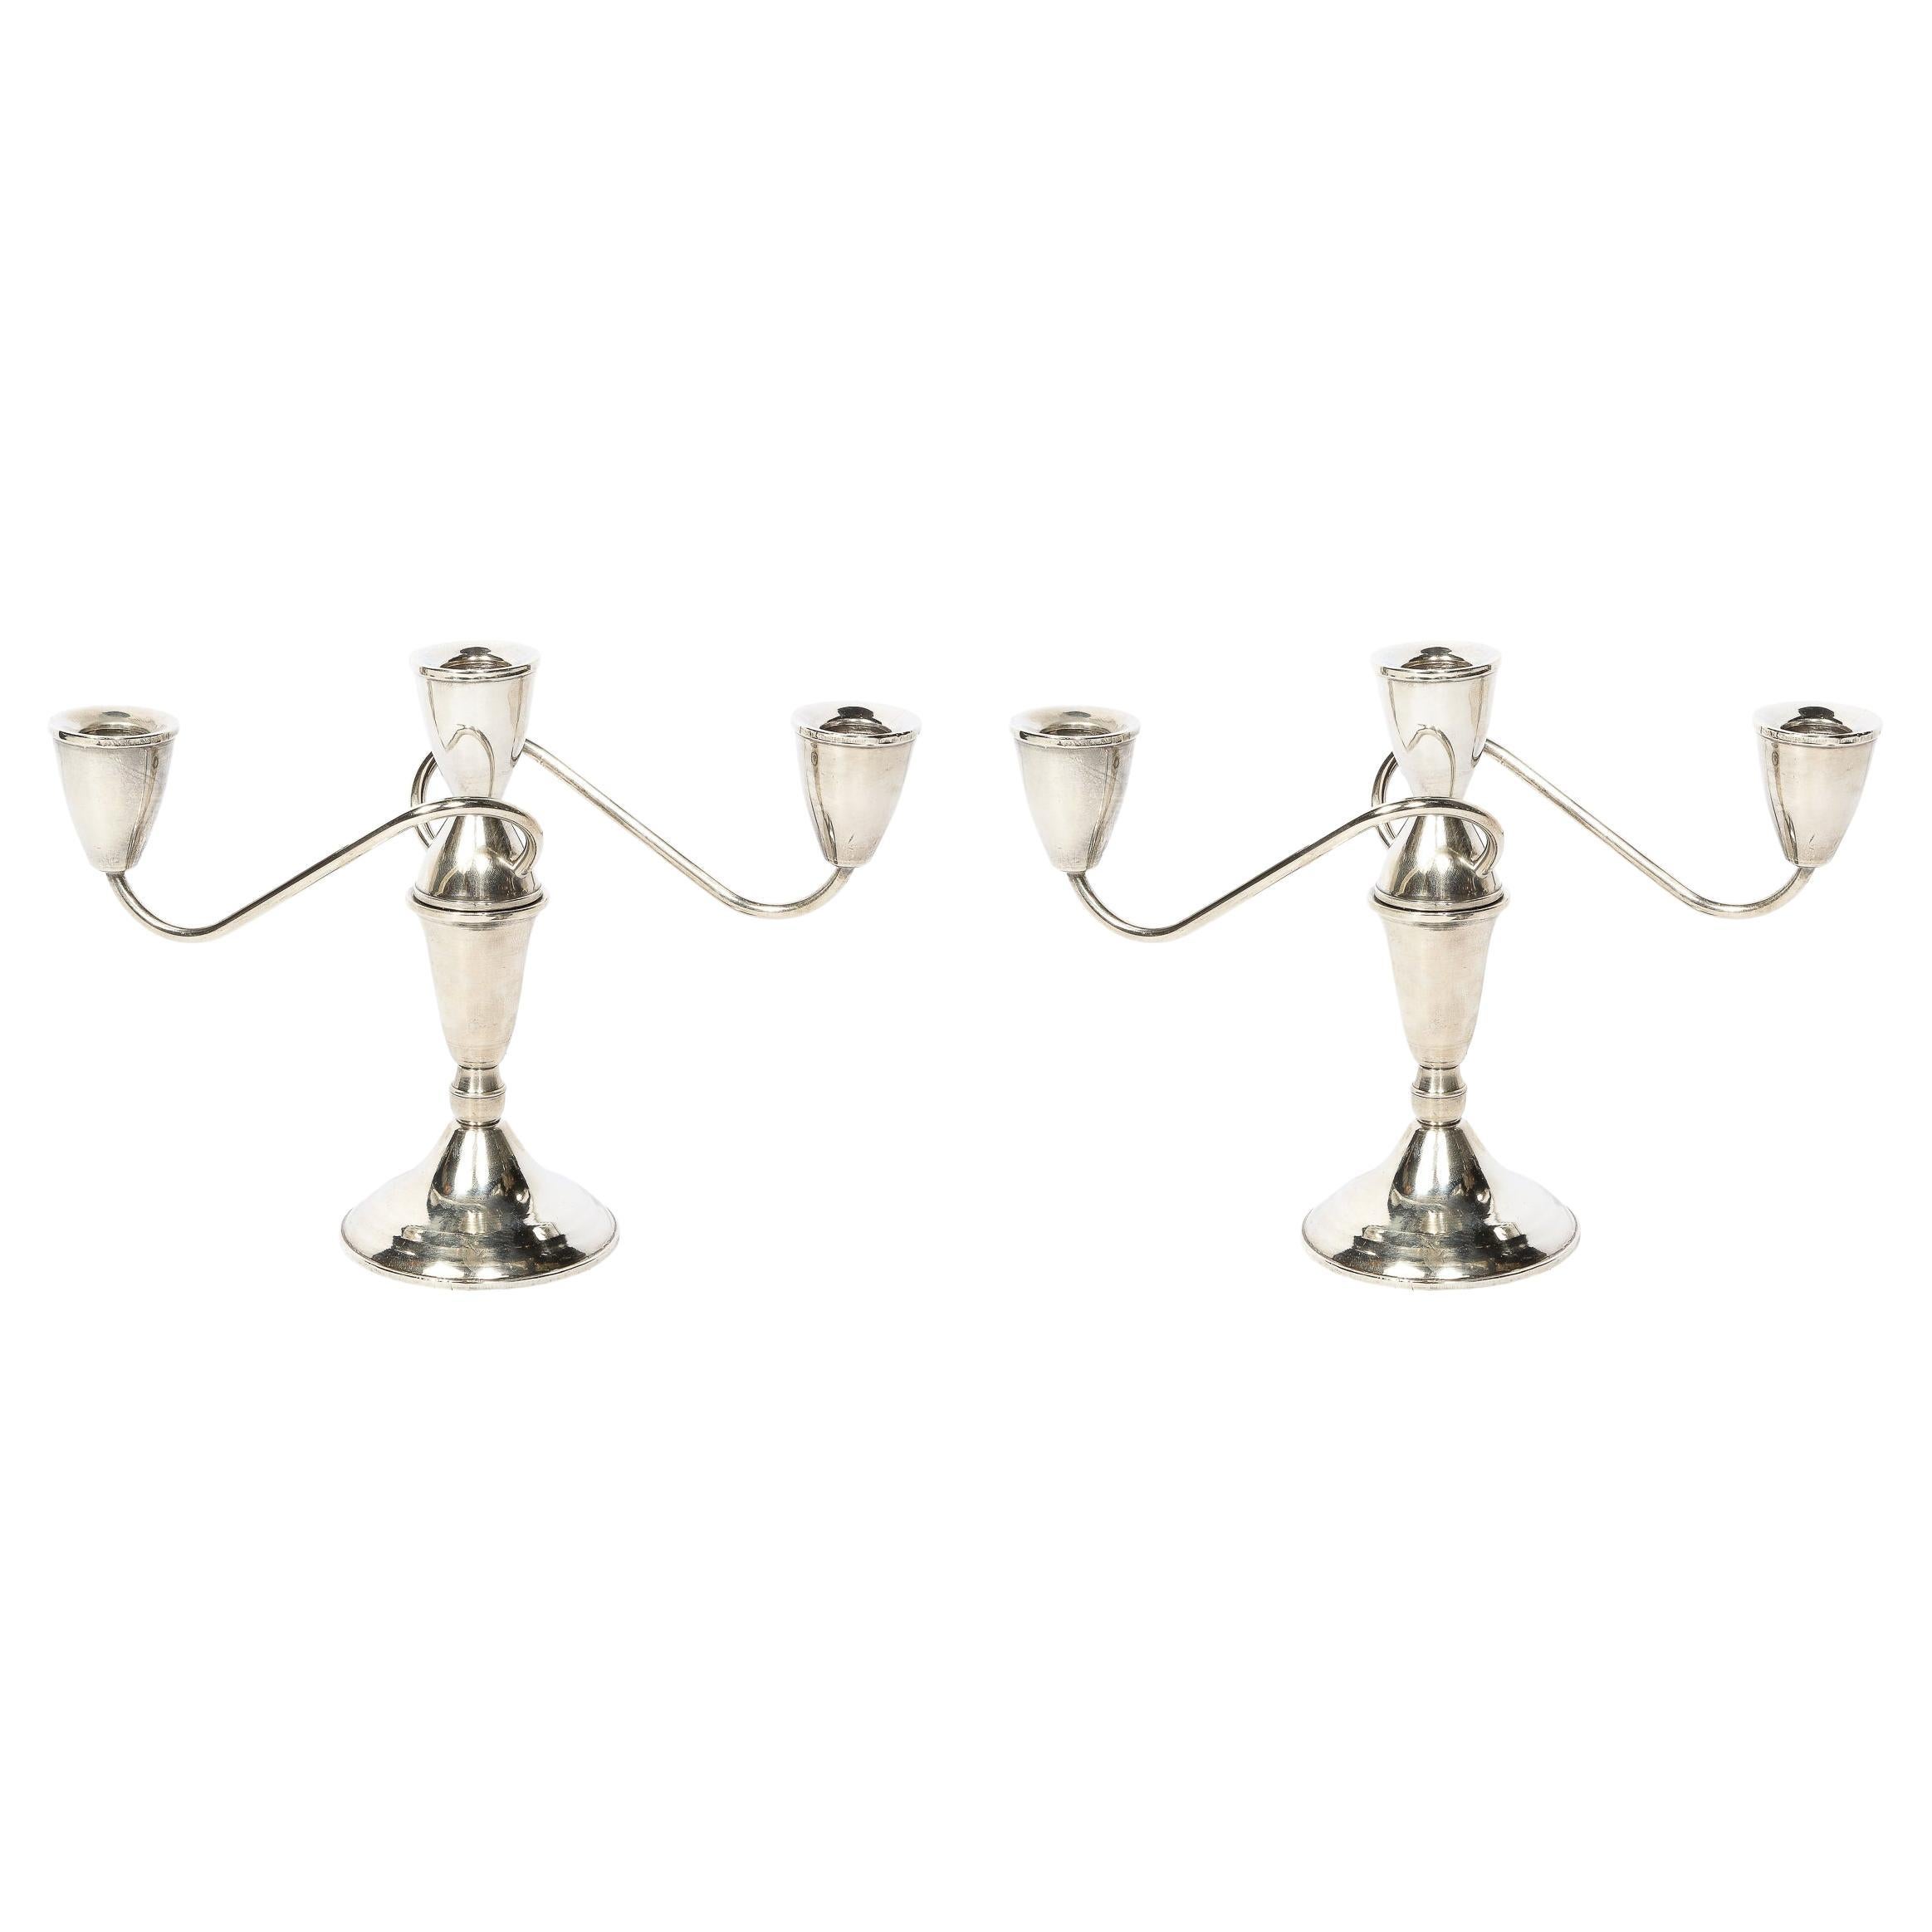 Pair of Sinuous Mid Century Sterling Candelabras by Duchin Creations For Sale